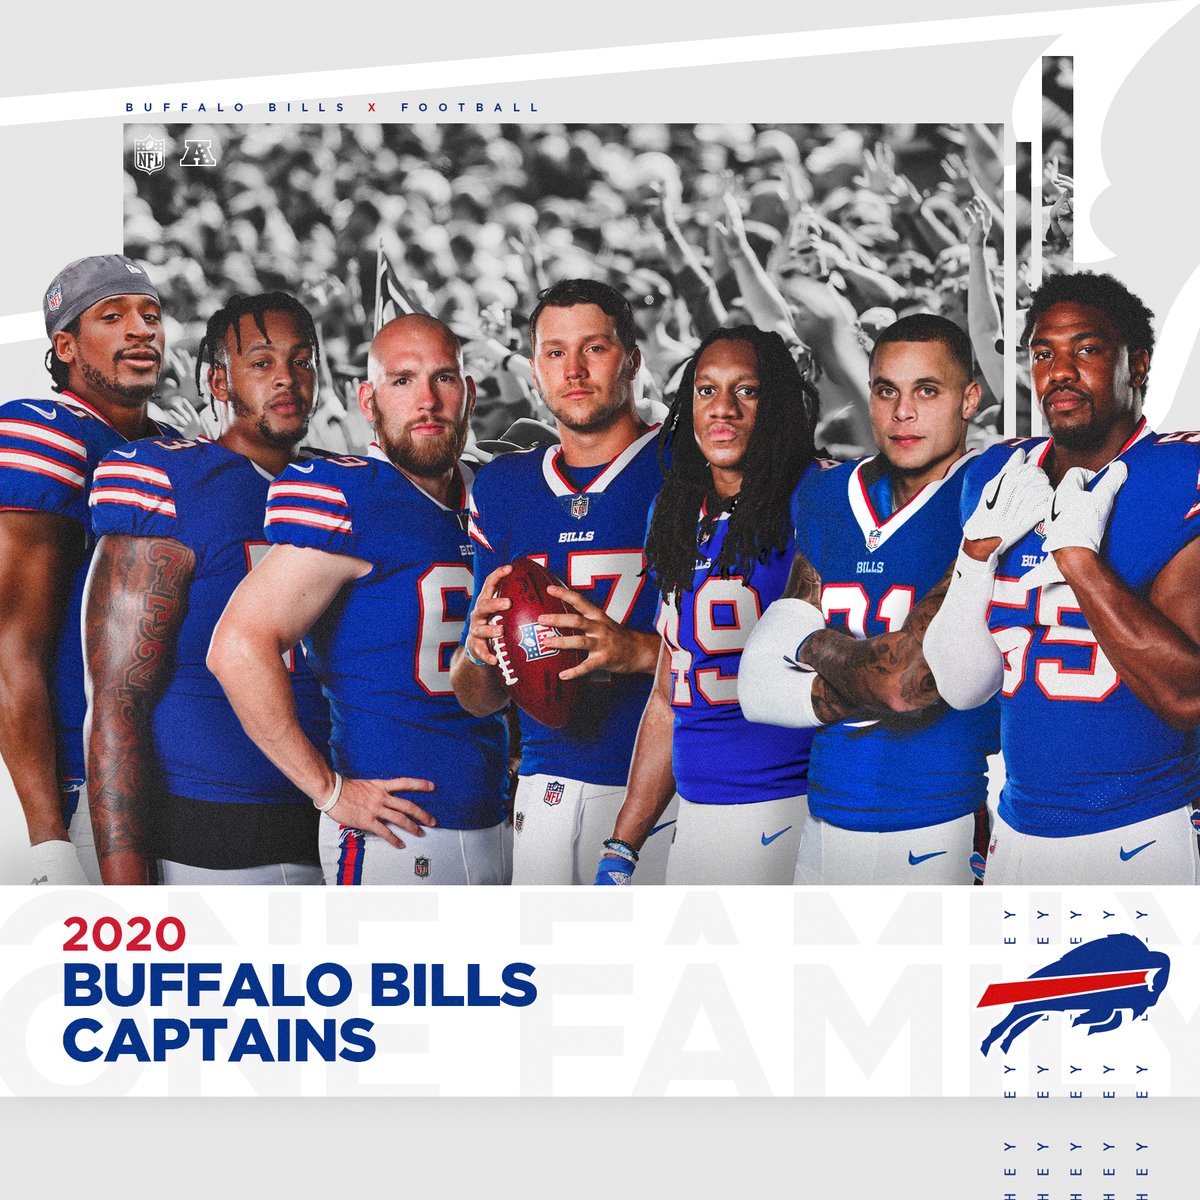 Buffalo Bills on Twitter: your 2020 Bills captains! 🙌 Get to know our leaders: https://t.co/0fe8ZTxK1X https://t.co/3IonJgdjN3" / Twitter